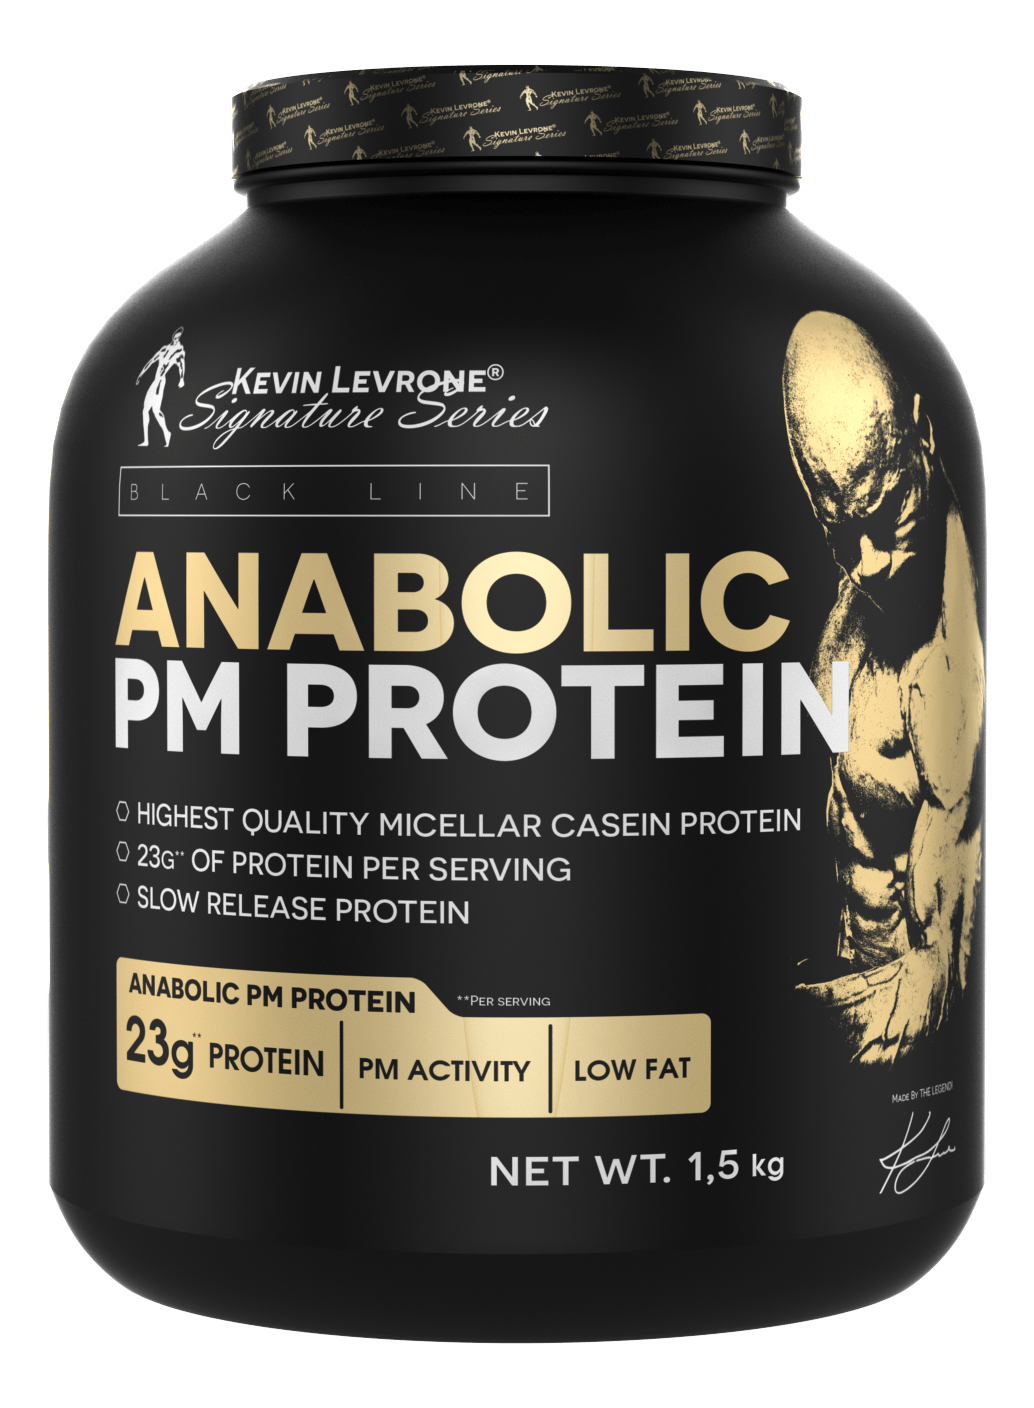 Протеин Kevin Levrone Anabolic PM Protein, 1.5 кг Печенье крем,  ml, Lethal Supplements. Protein. Mass Gain recovery Anti-catabolic properties 